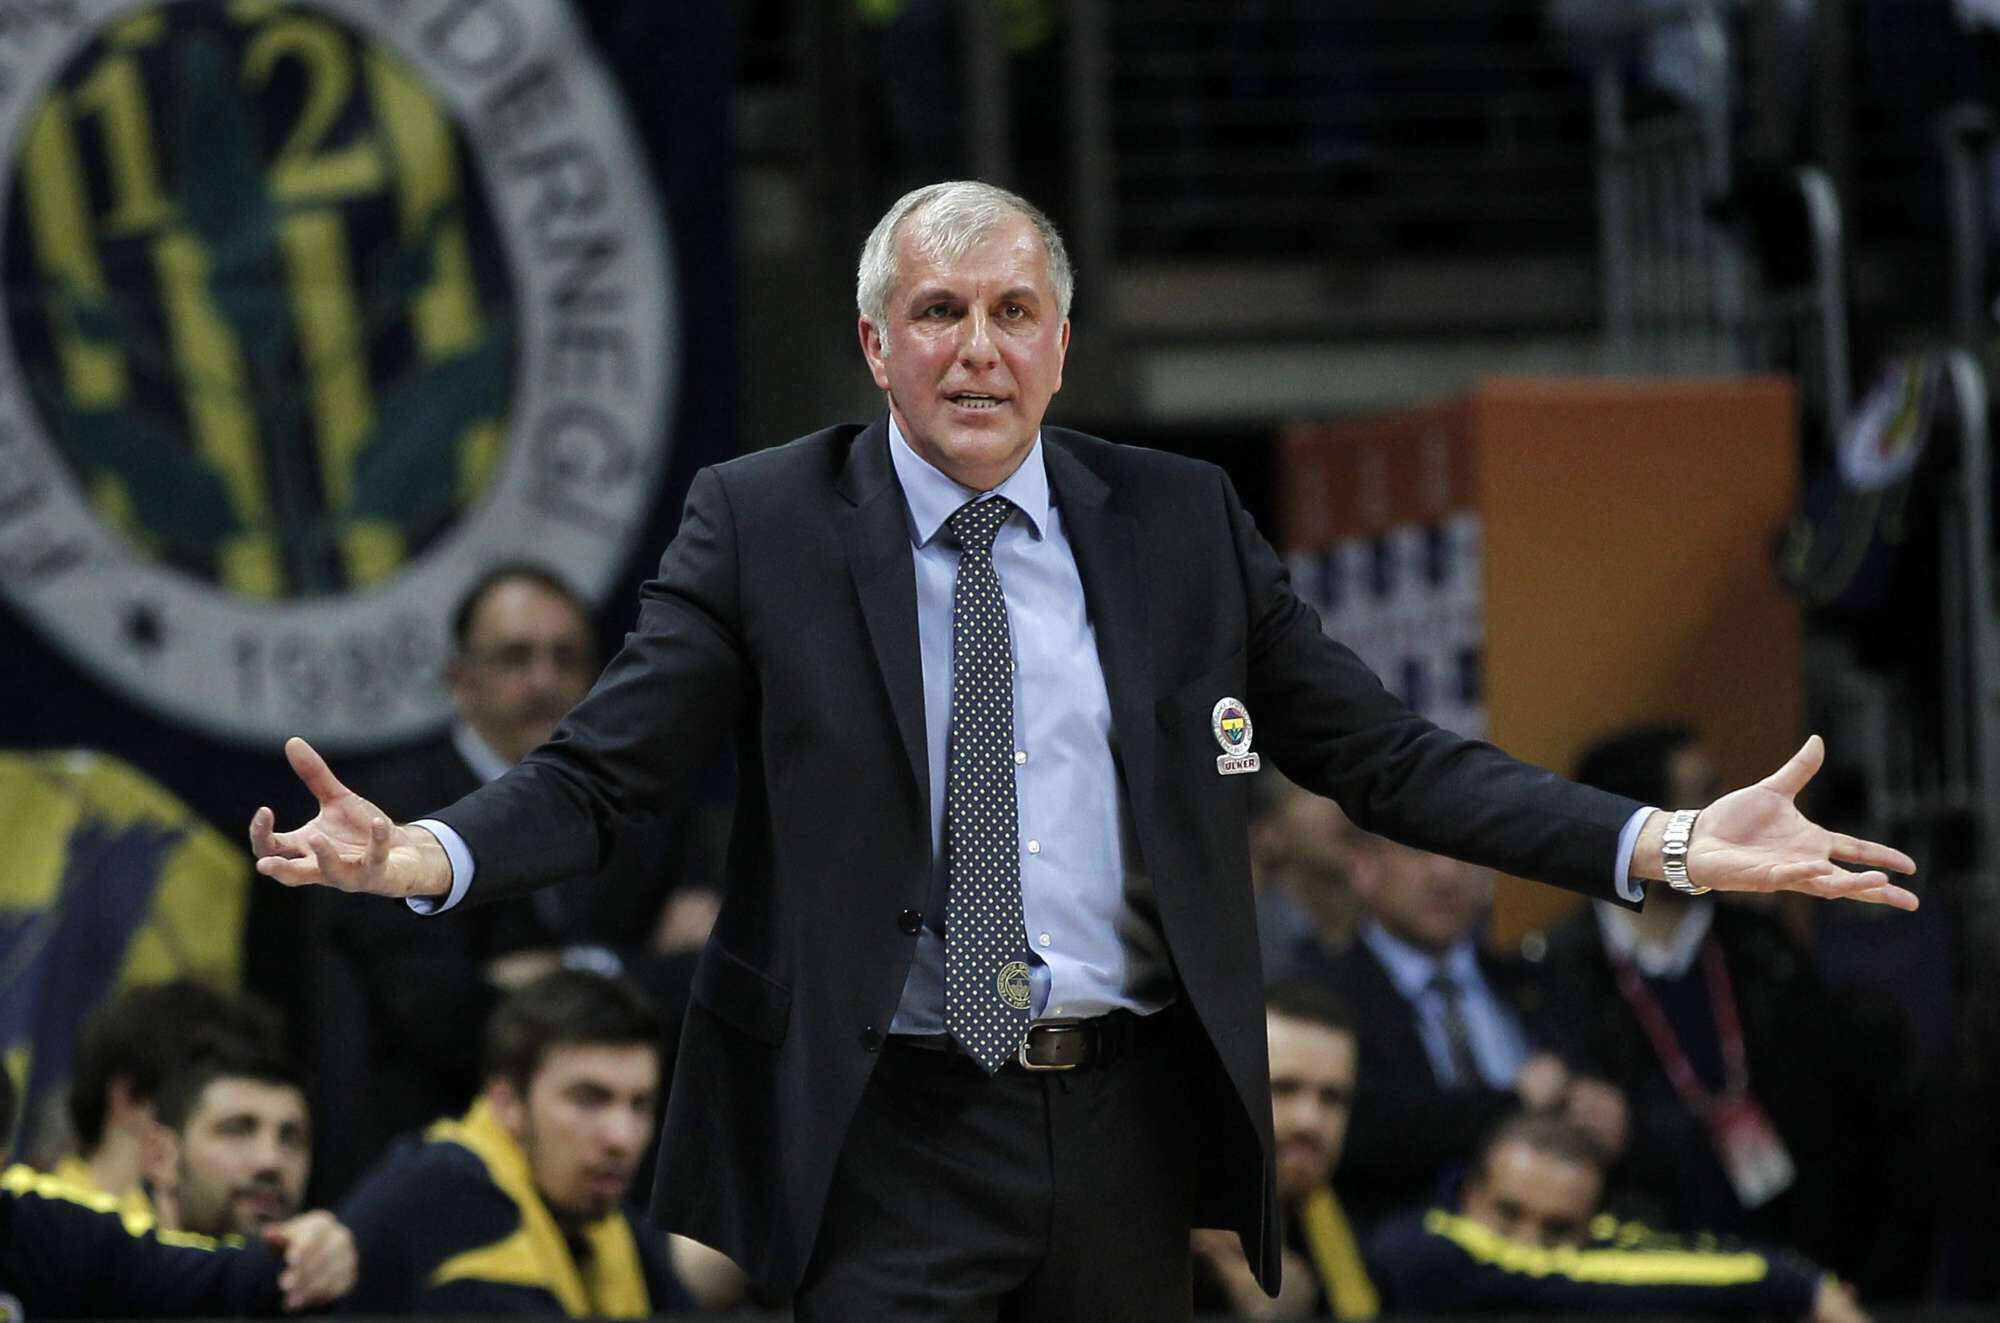 epa04144970 Fenerbahce Ulker's head coach Zelimir Obradovic reacts during the Euroleague Top 16 group E basketball match between Fenerbahce Ulker and EA7 Emporio Armani Milan, in Istanbul, Turkey, 28 March 2014. EPA/SEDAT SUNA